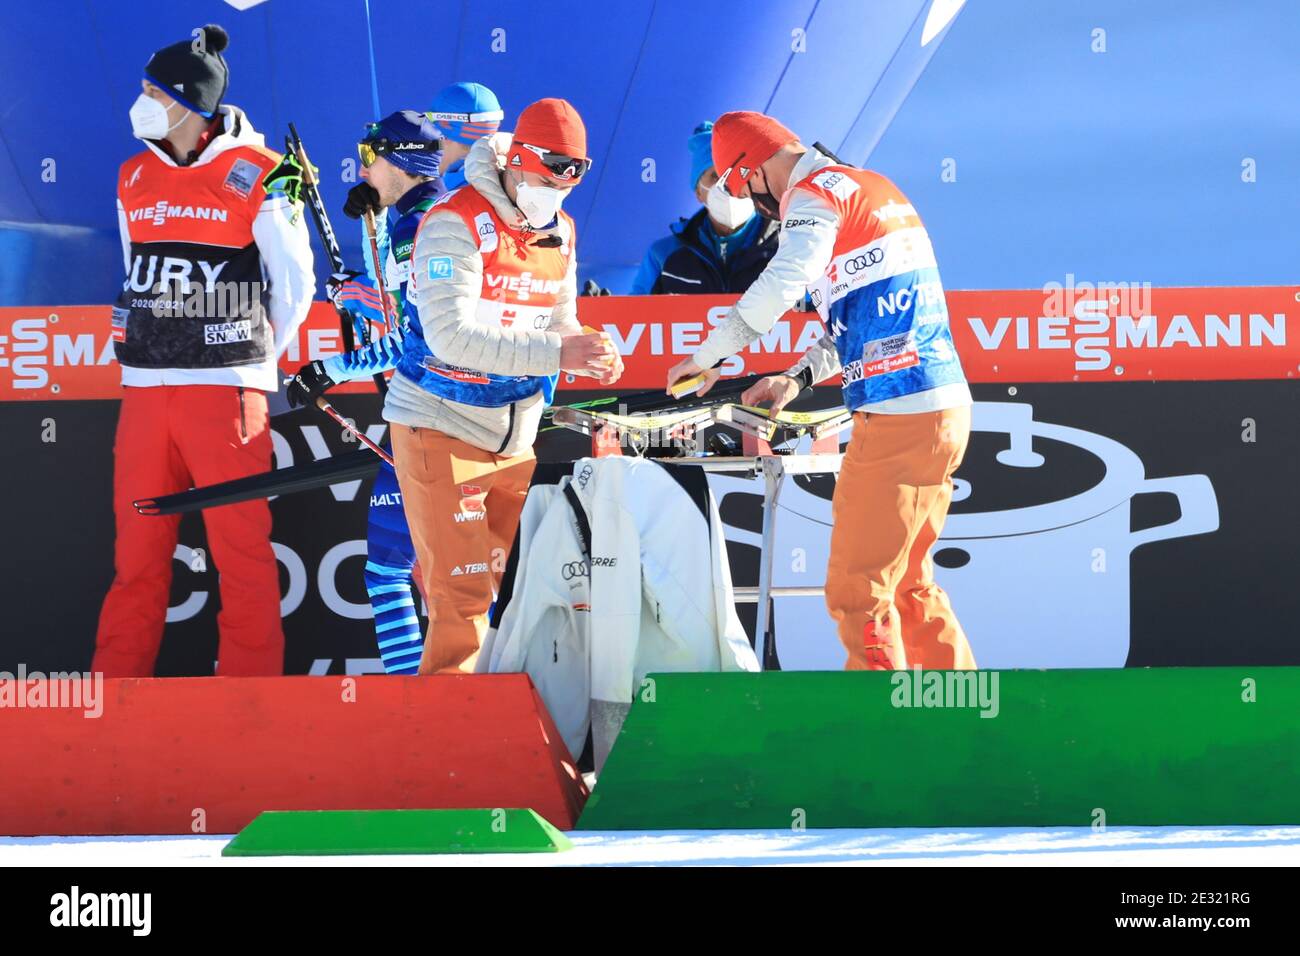 Val Di Fiemme, Trentino, Italien. 16. Januar 2021; Val Di Fiemme, Predazzo, Trentino, Italien; International Ski Federation Nordic Combined Team Sprint World Cup, Deutschland Mitarbeiter Credit: Action Plus Sports Images/Alamy Live News Stockfoto